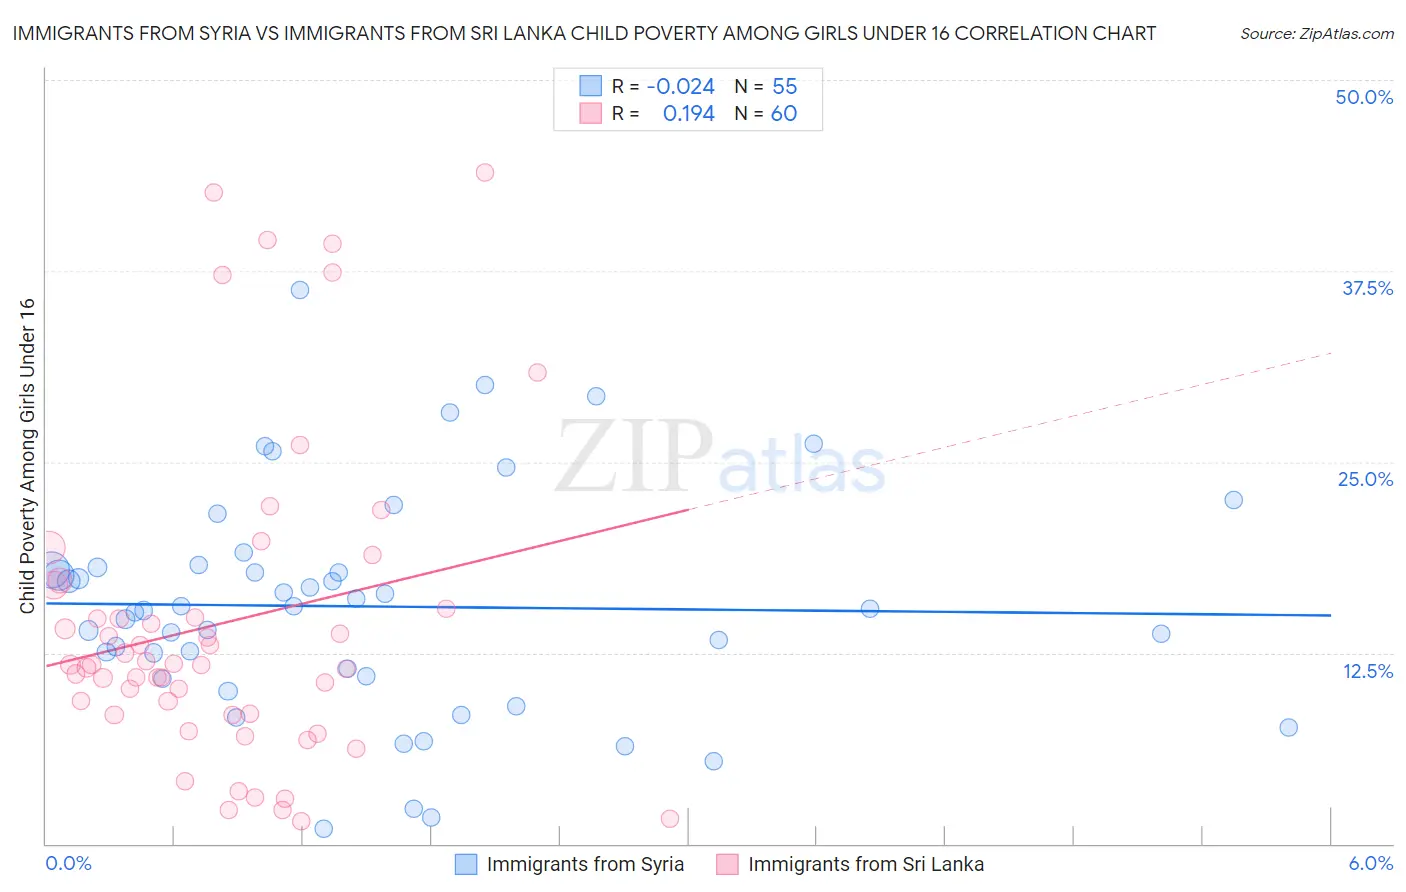 Immigrants from Syria vs Immigrants from Sri Lanka Child Poverty Among Girls Under 16